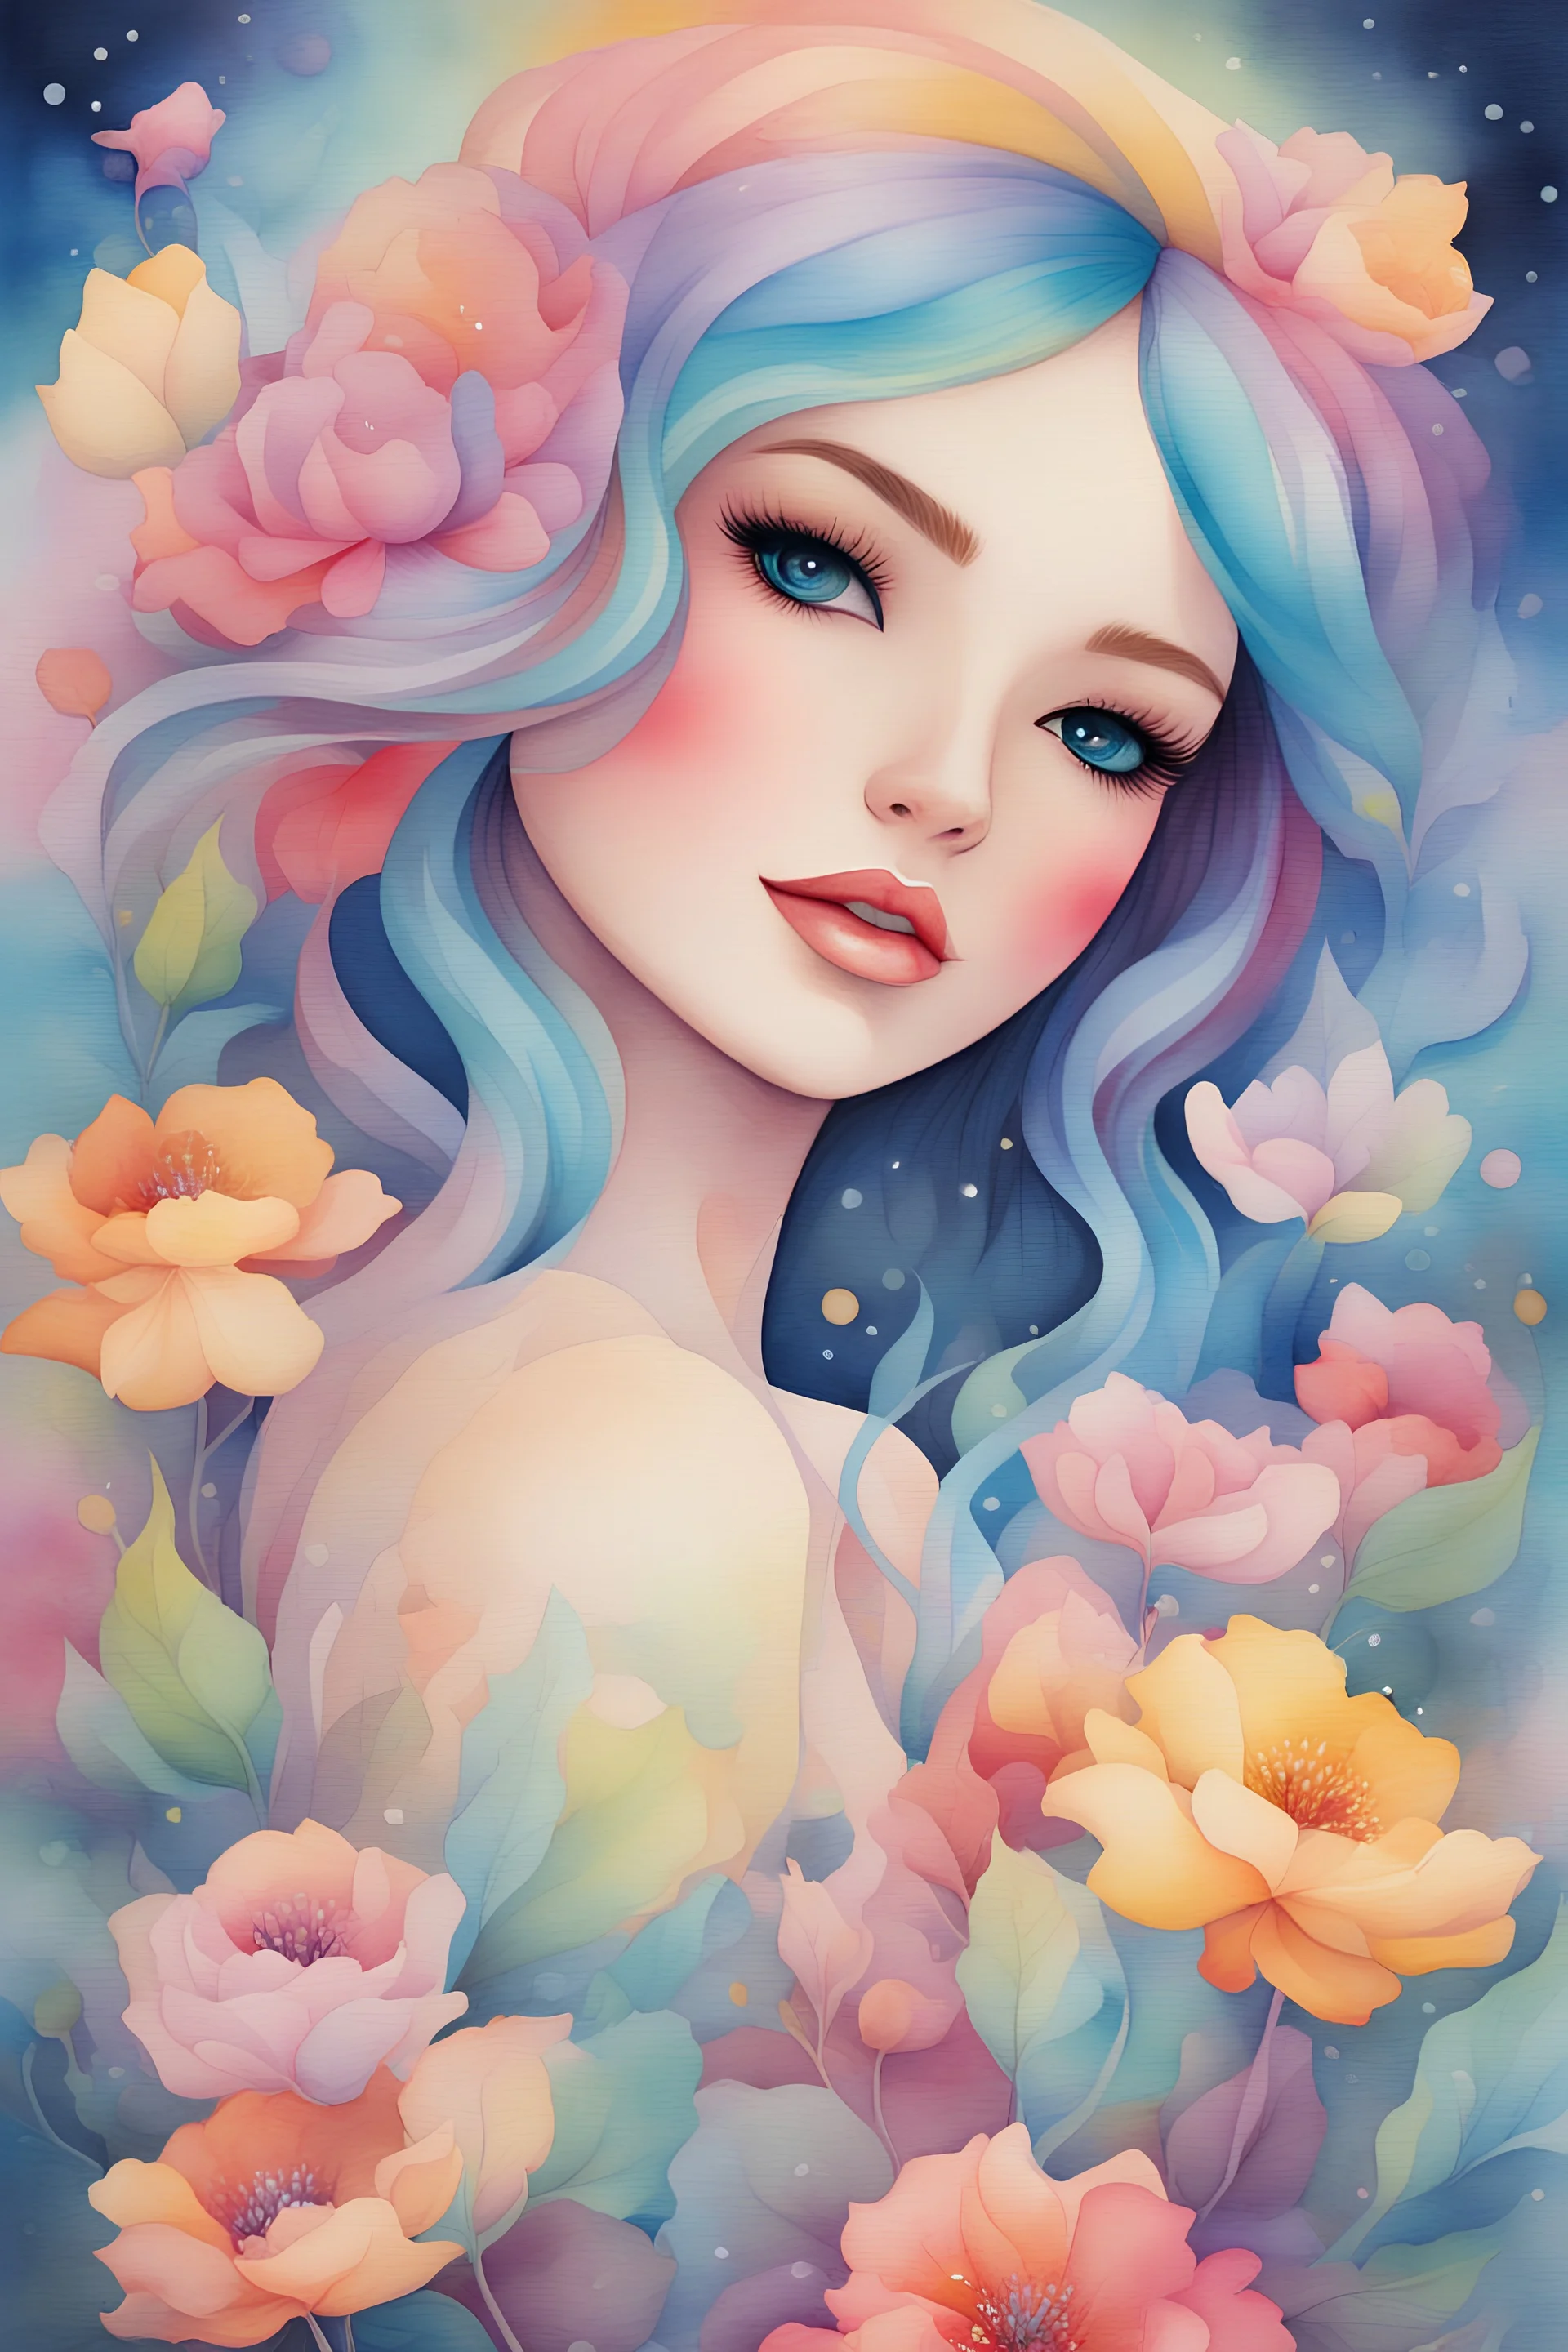 Watercolor style, watercolor painting of a girl with beautiful flowers, sparkles background, glow, rainbow hair, beautiful face, young girl, watercolor background, vibrant watercolor painting, by Jeremiah Ketner, dream, illustration art, watercolor painting, very beautiful painting, beautiful watercolor painting, colorful watercolor, romanticism painting, fine art, dynamic, high quality